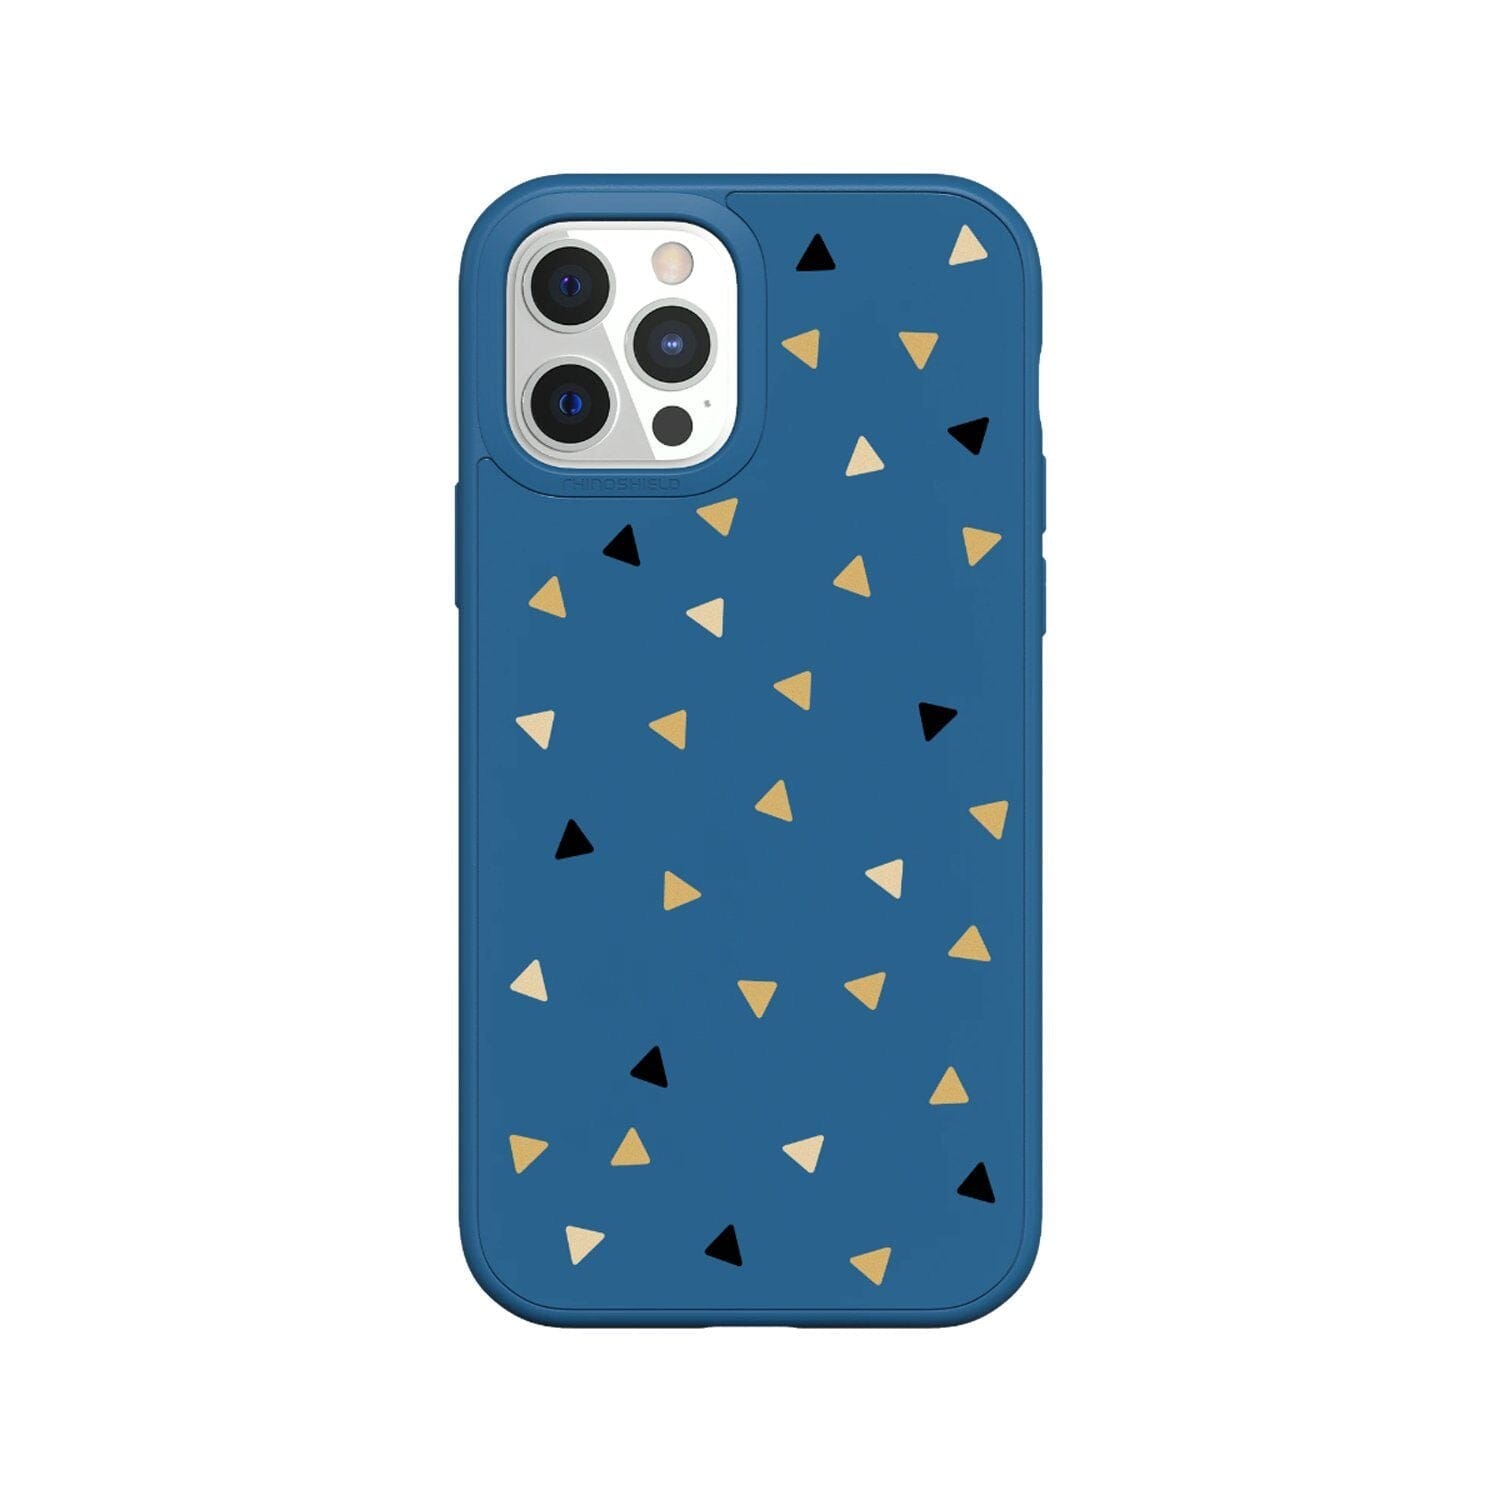 RhinoShield SolidSuit Design Case for iPhone 12 Series (2020) Default RhinoShield iPhone 12 Pro Max 6.7" Royal Blue/Sprinkle Of Cones 